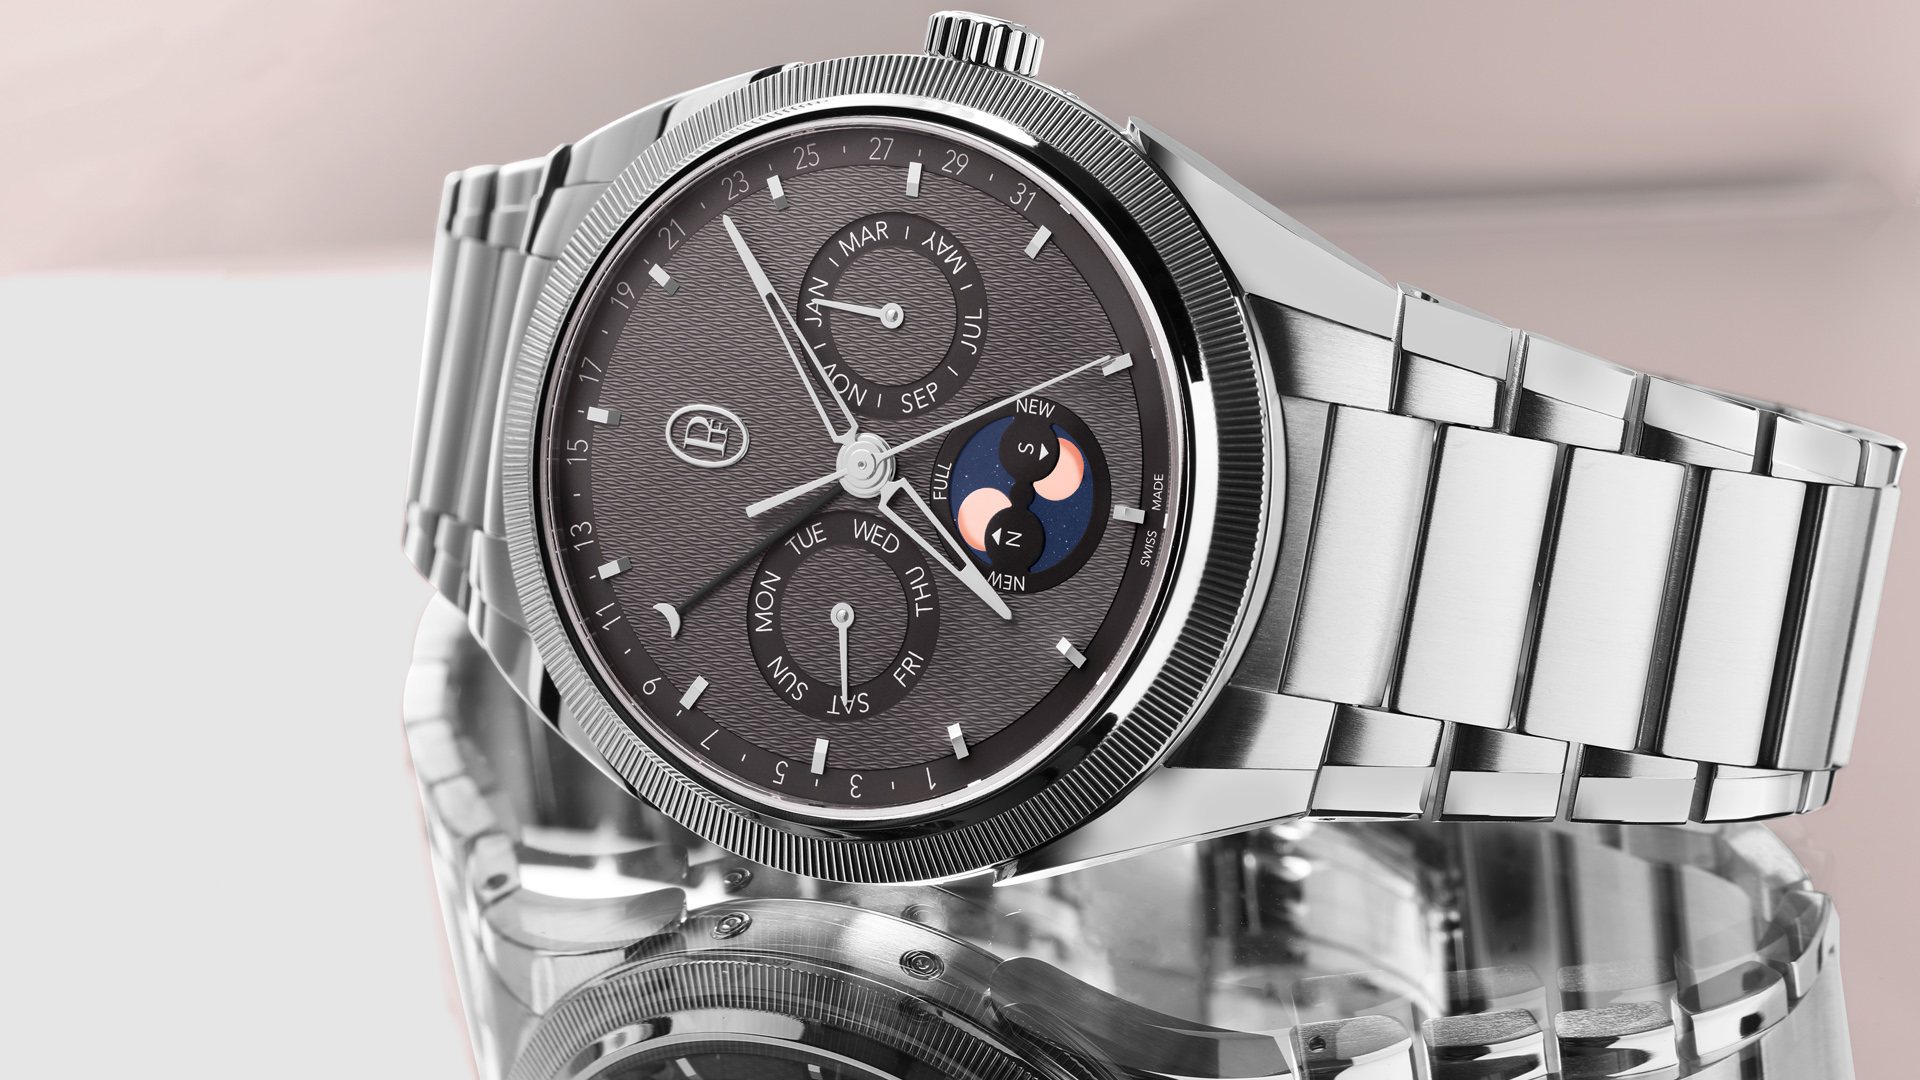 Parmigiani celebrates Silver Jubilee year with launch of Tonda PF